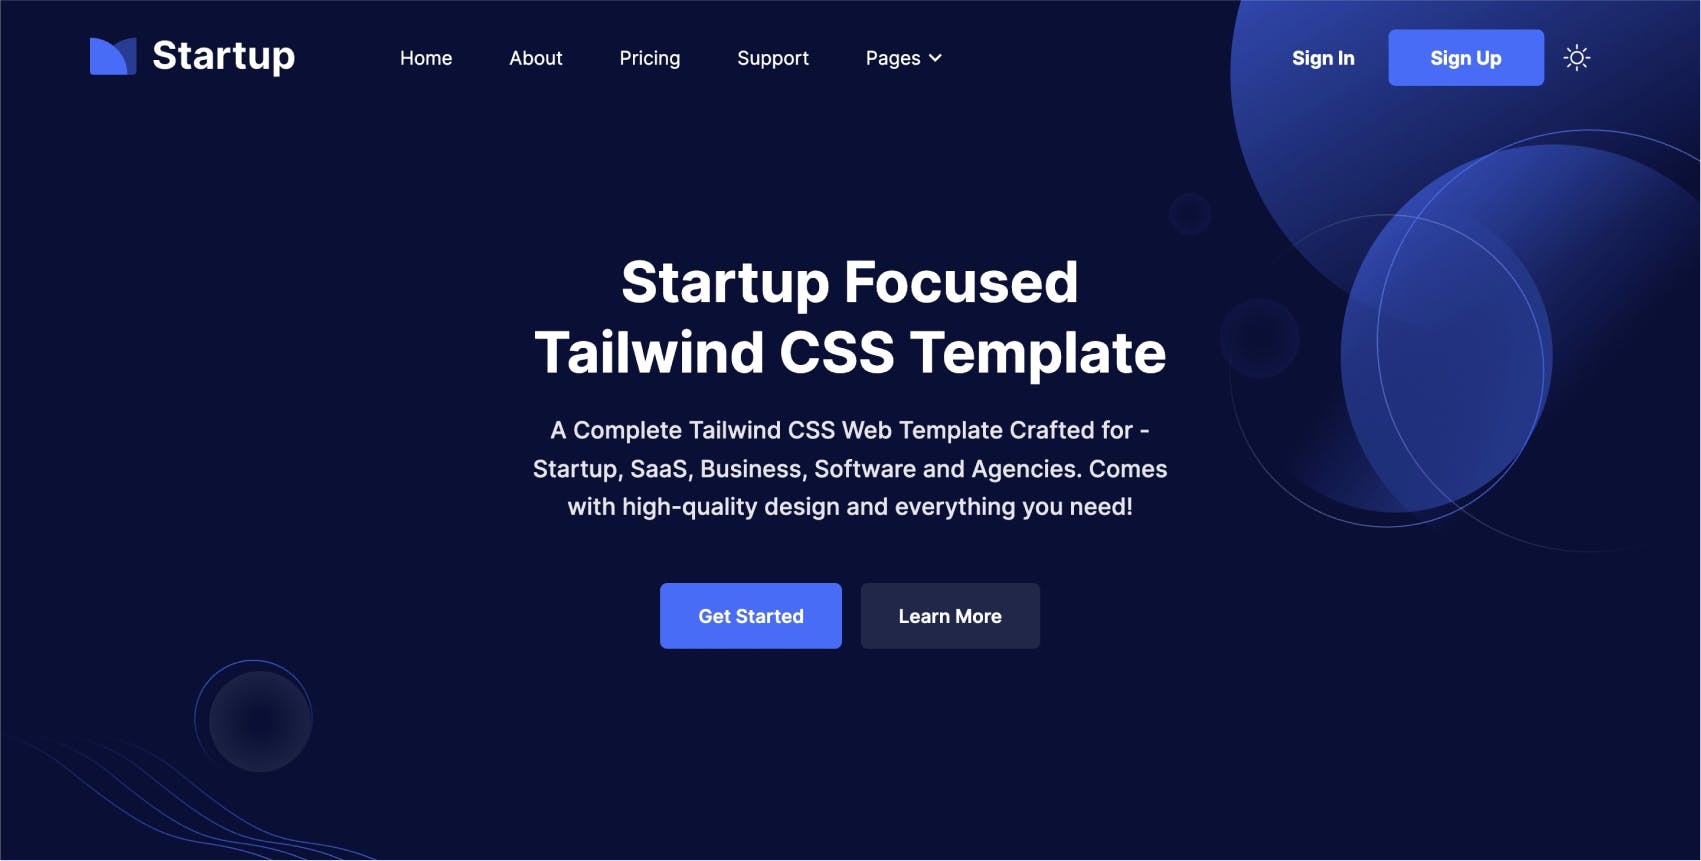 Startup - Tailwind CSS Template for Startup and Business